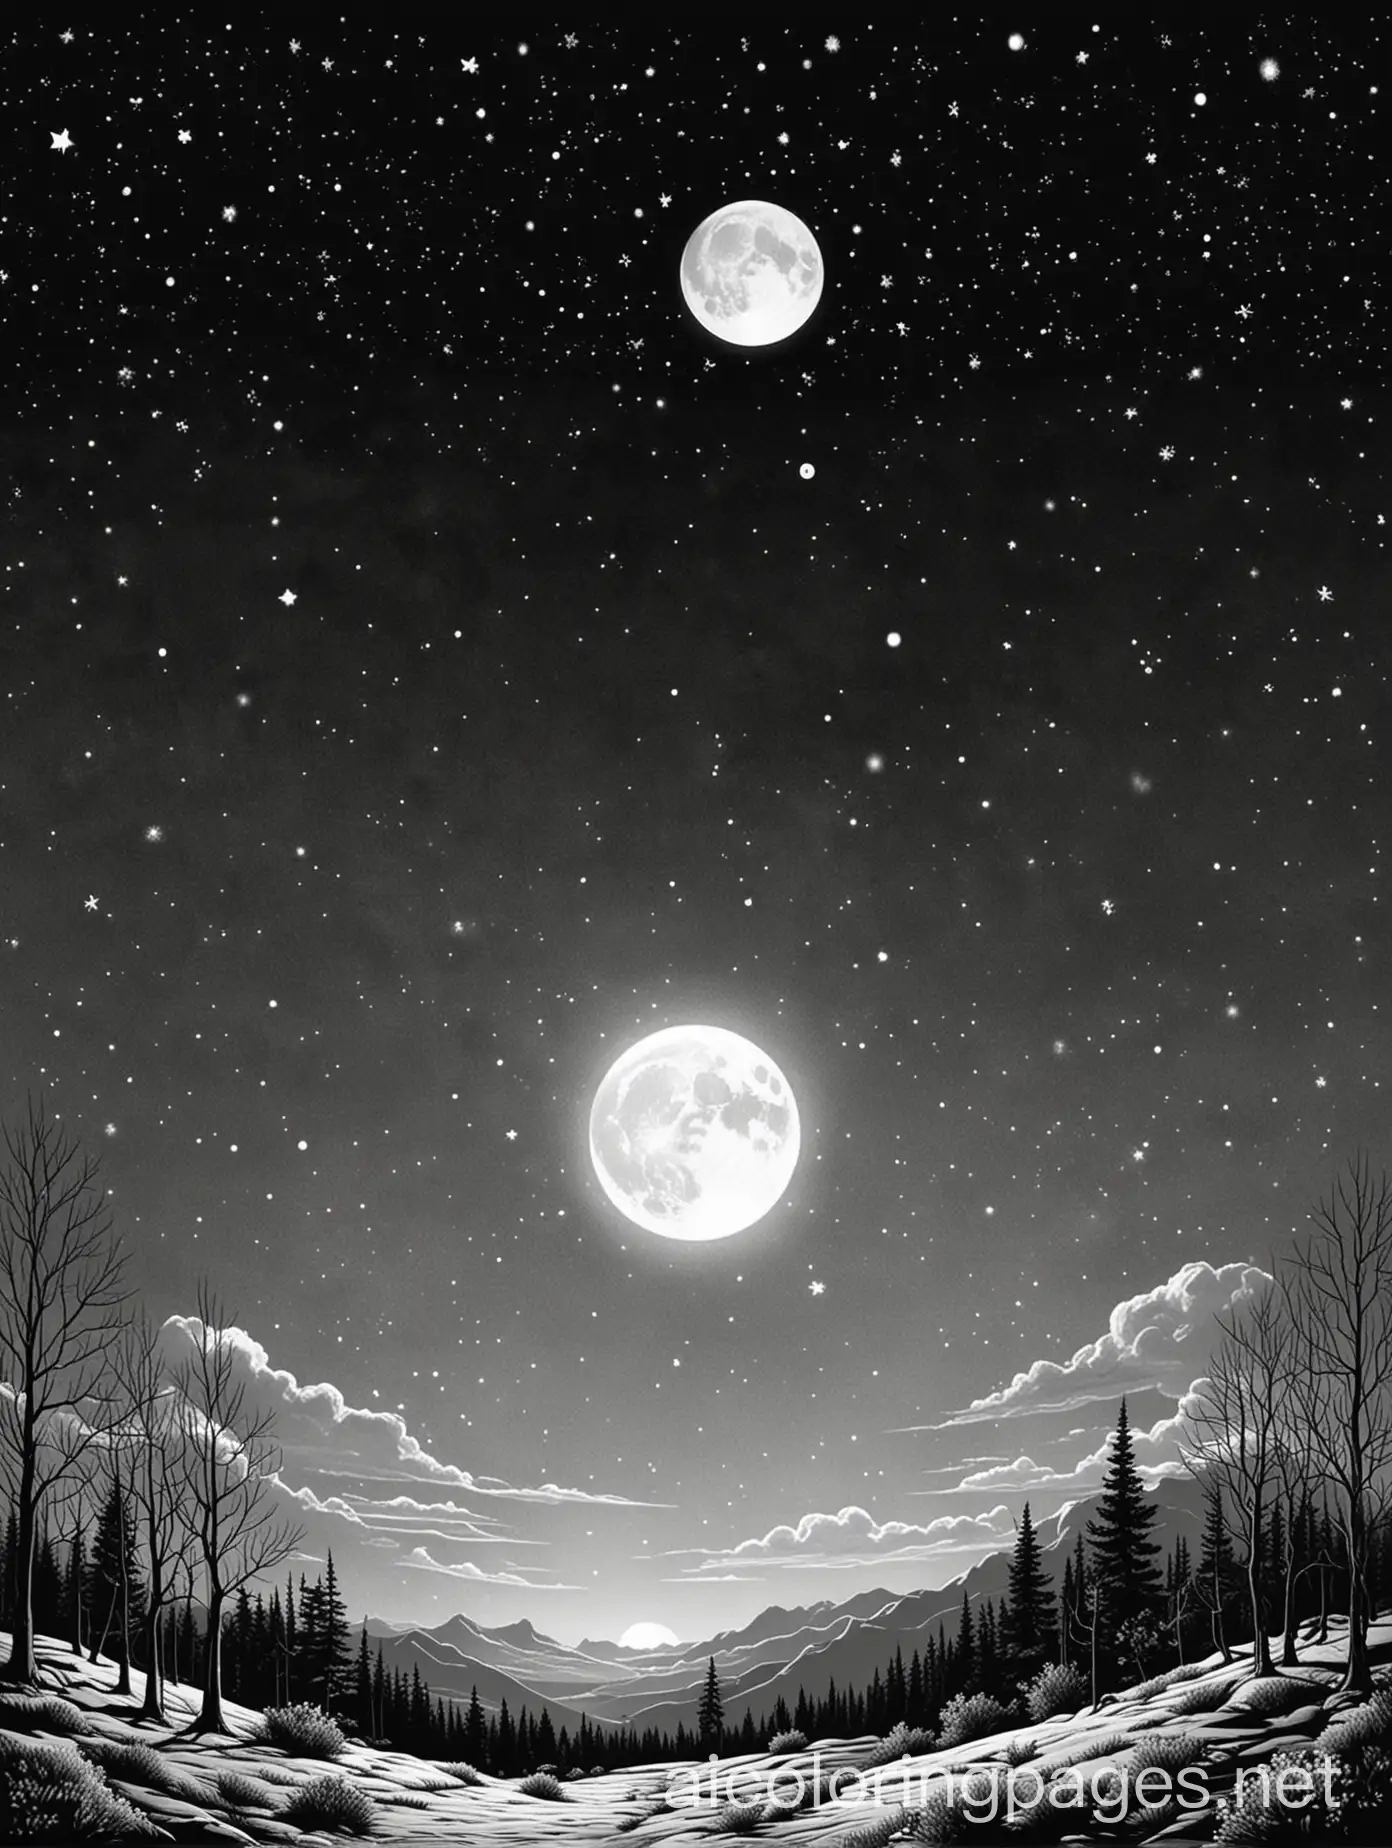 a very Christmassy, moonlit night sky, with only one moon, Coloring Page, black and white, line art, white background, Simplicity, Ample White Space. The background of the coloring page is plain white to make it easy for young children to color within the lines. The outlines of all the subjects are easy to distinguish, making it simple for kids to color without too much difficulty